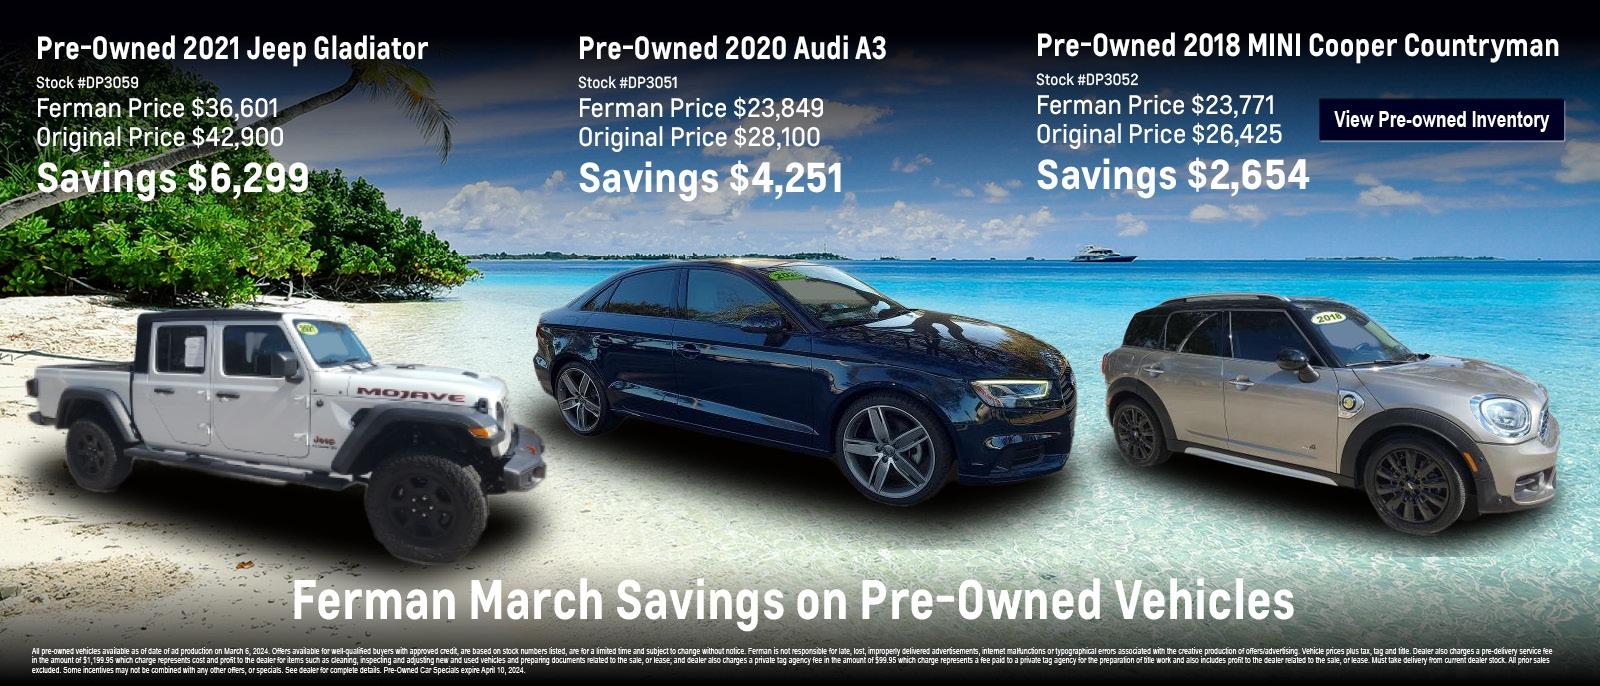 March Savings on Pre-Owned 2021 Jeep Gladiator, 2020 Audi A3 and 2018 MINI Cooper Countryman